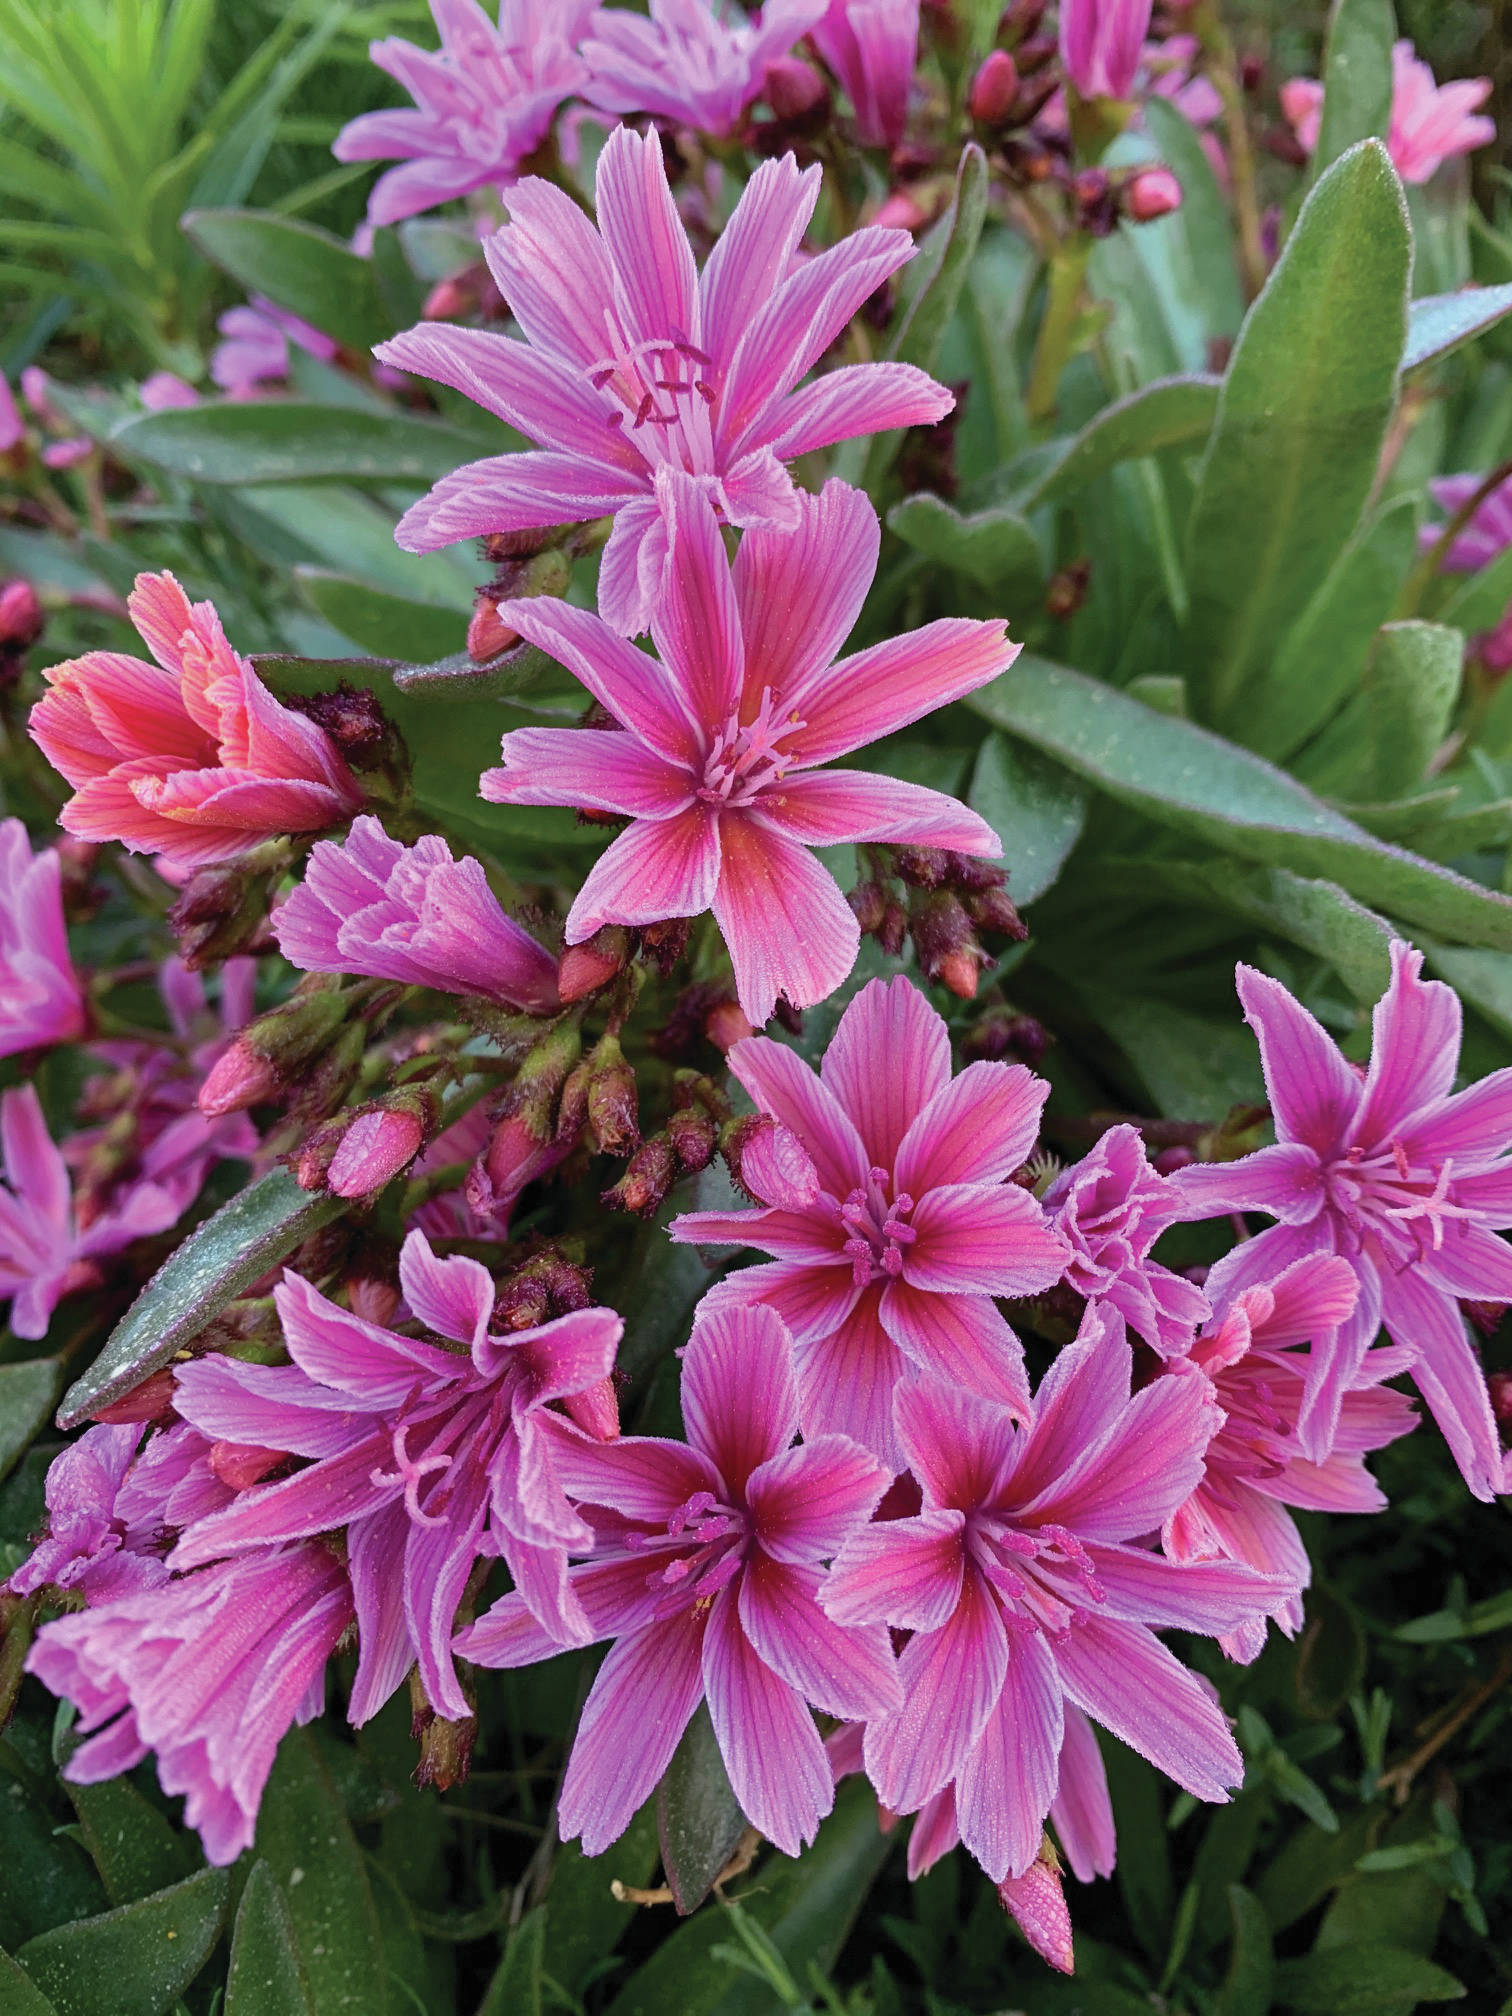 Lewisia is reliably early, yet enjoys a long bloom time. It also selfsows with enthusiasm, Rosemary Fitzpatrick says of this gorgeous flower, as seen here on June 4, 2020, in her Homer, Alaska, garden. (Photo by Rosemary Fitzpatrick)